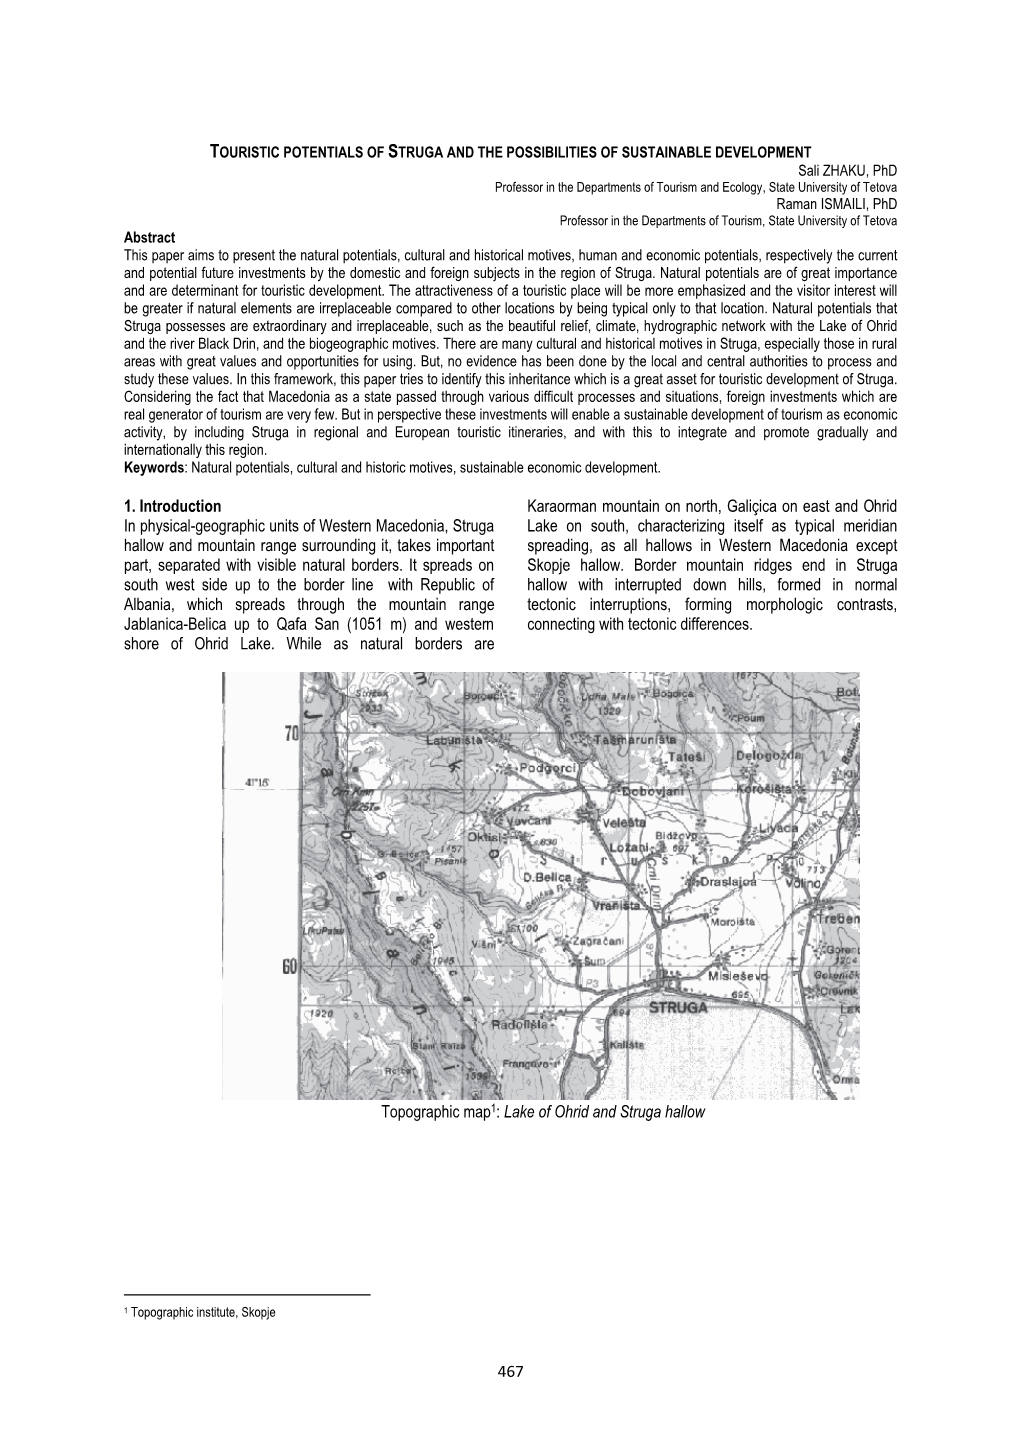 467 1. Introduction in Physical-Geographic Units Of